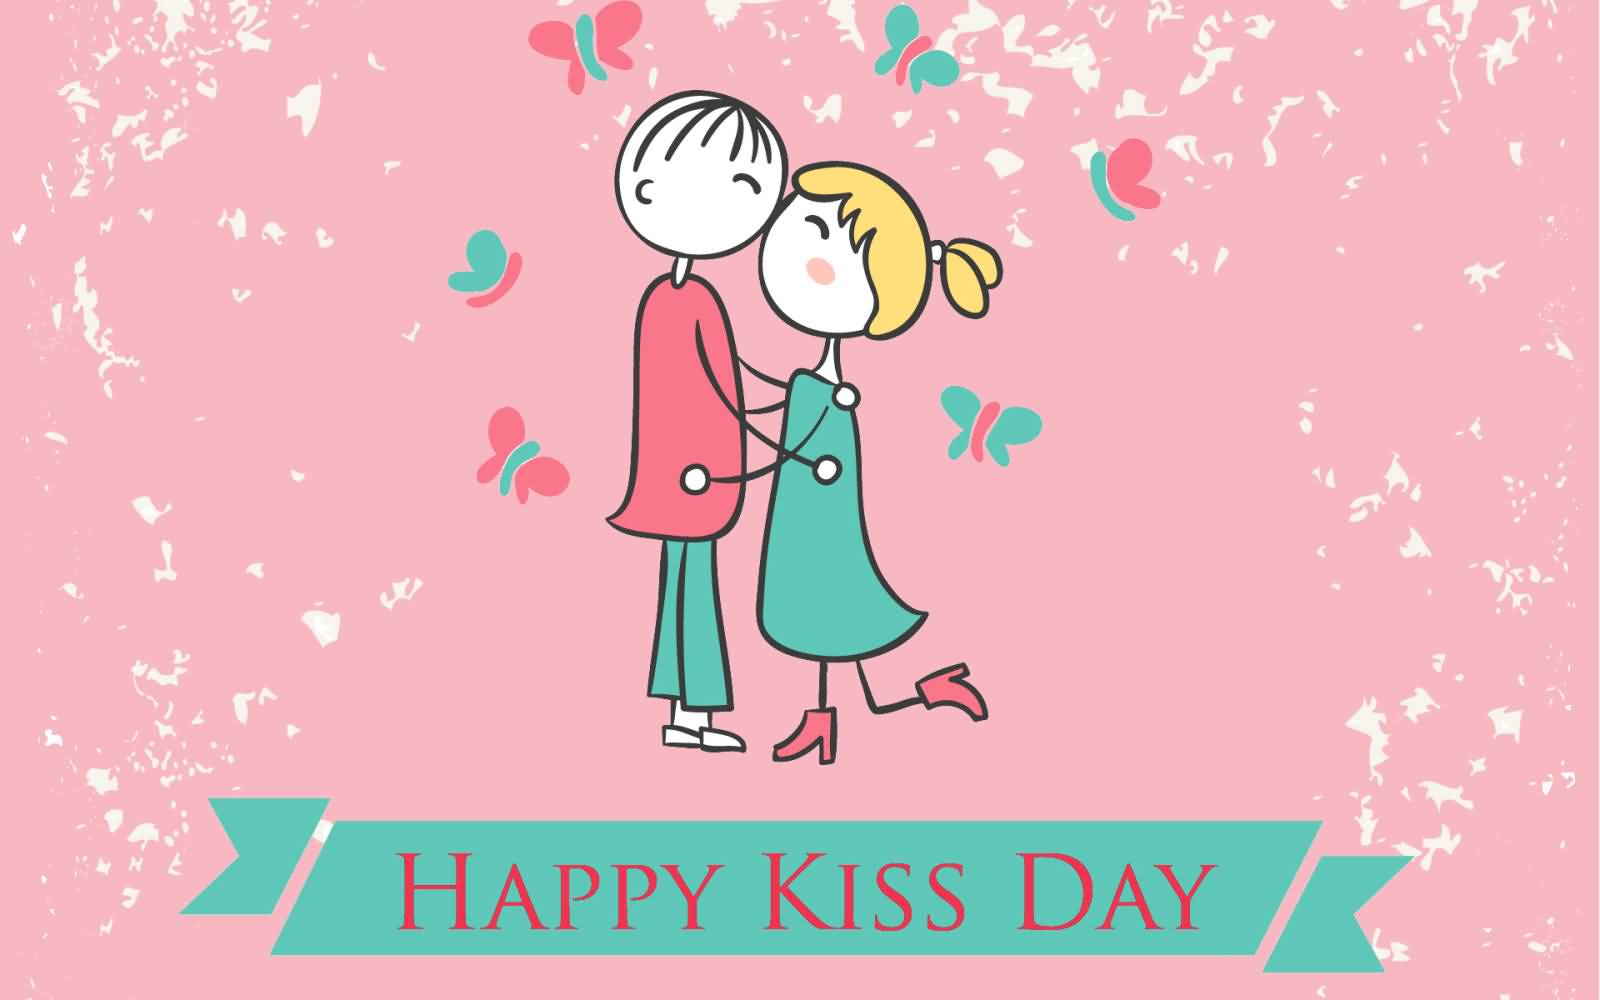 Happy Kiss Day 2017 Kissing Couple Illustration - Happy Kiss Day Date 2019 - HD Wallpaper 